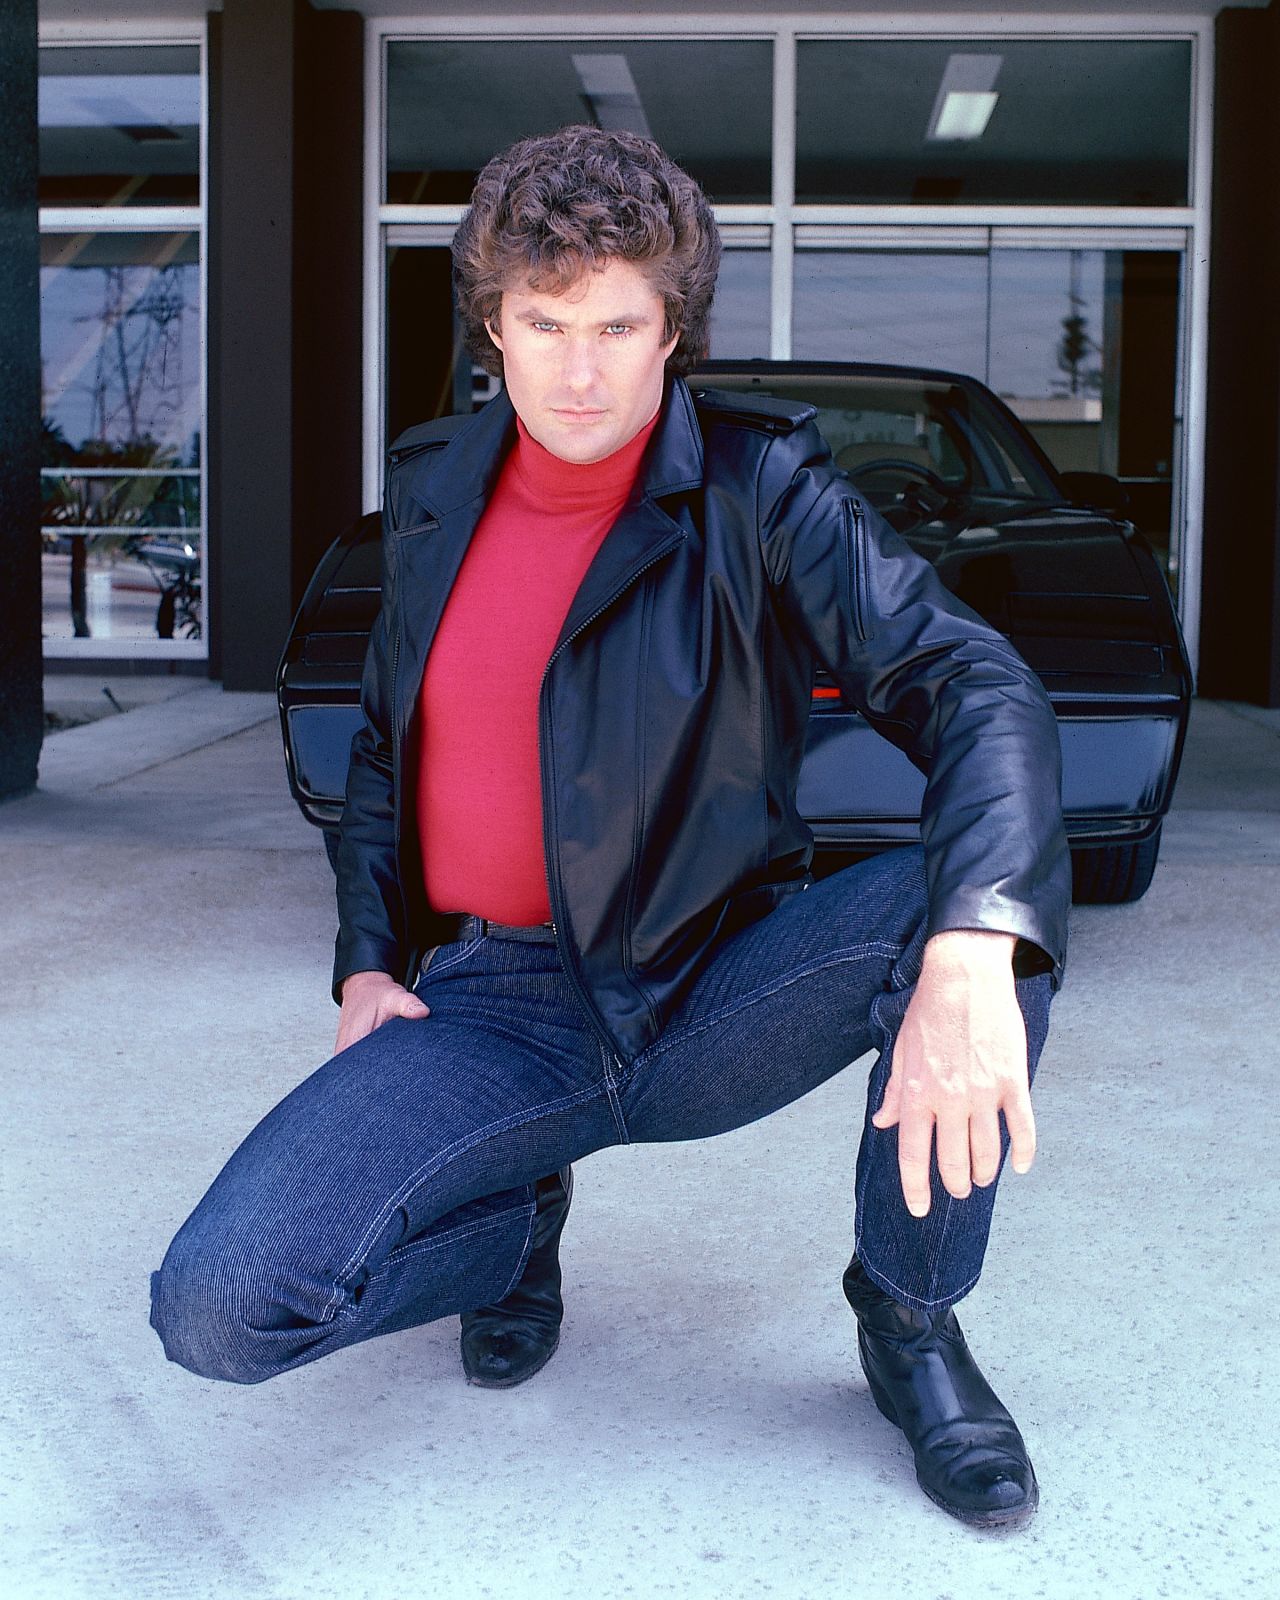 Ever heard of David Hasselhoff's clothing line '"Malibu Dave"? No? You're not alone.